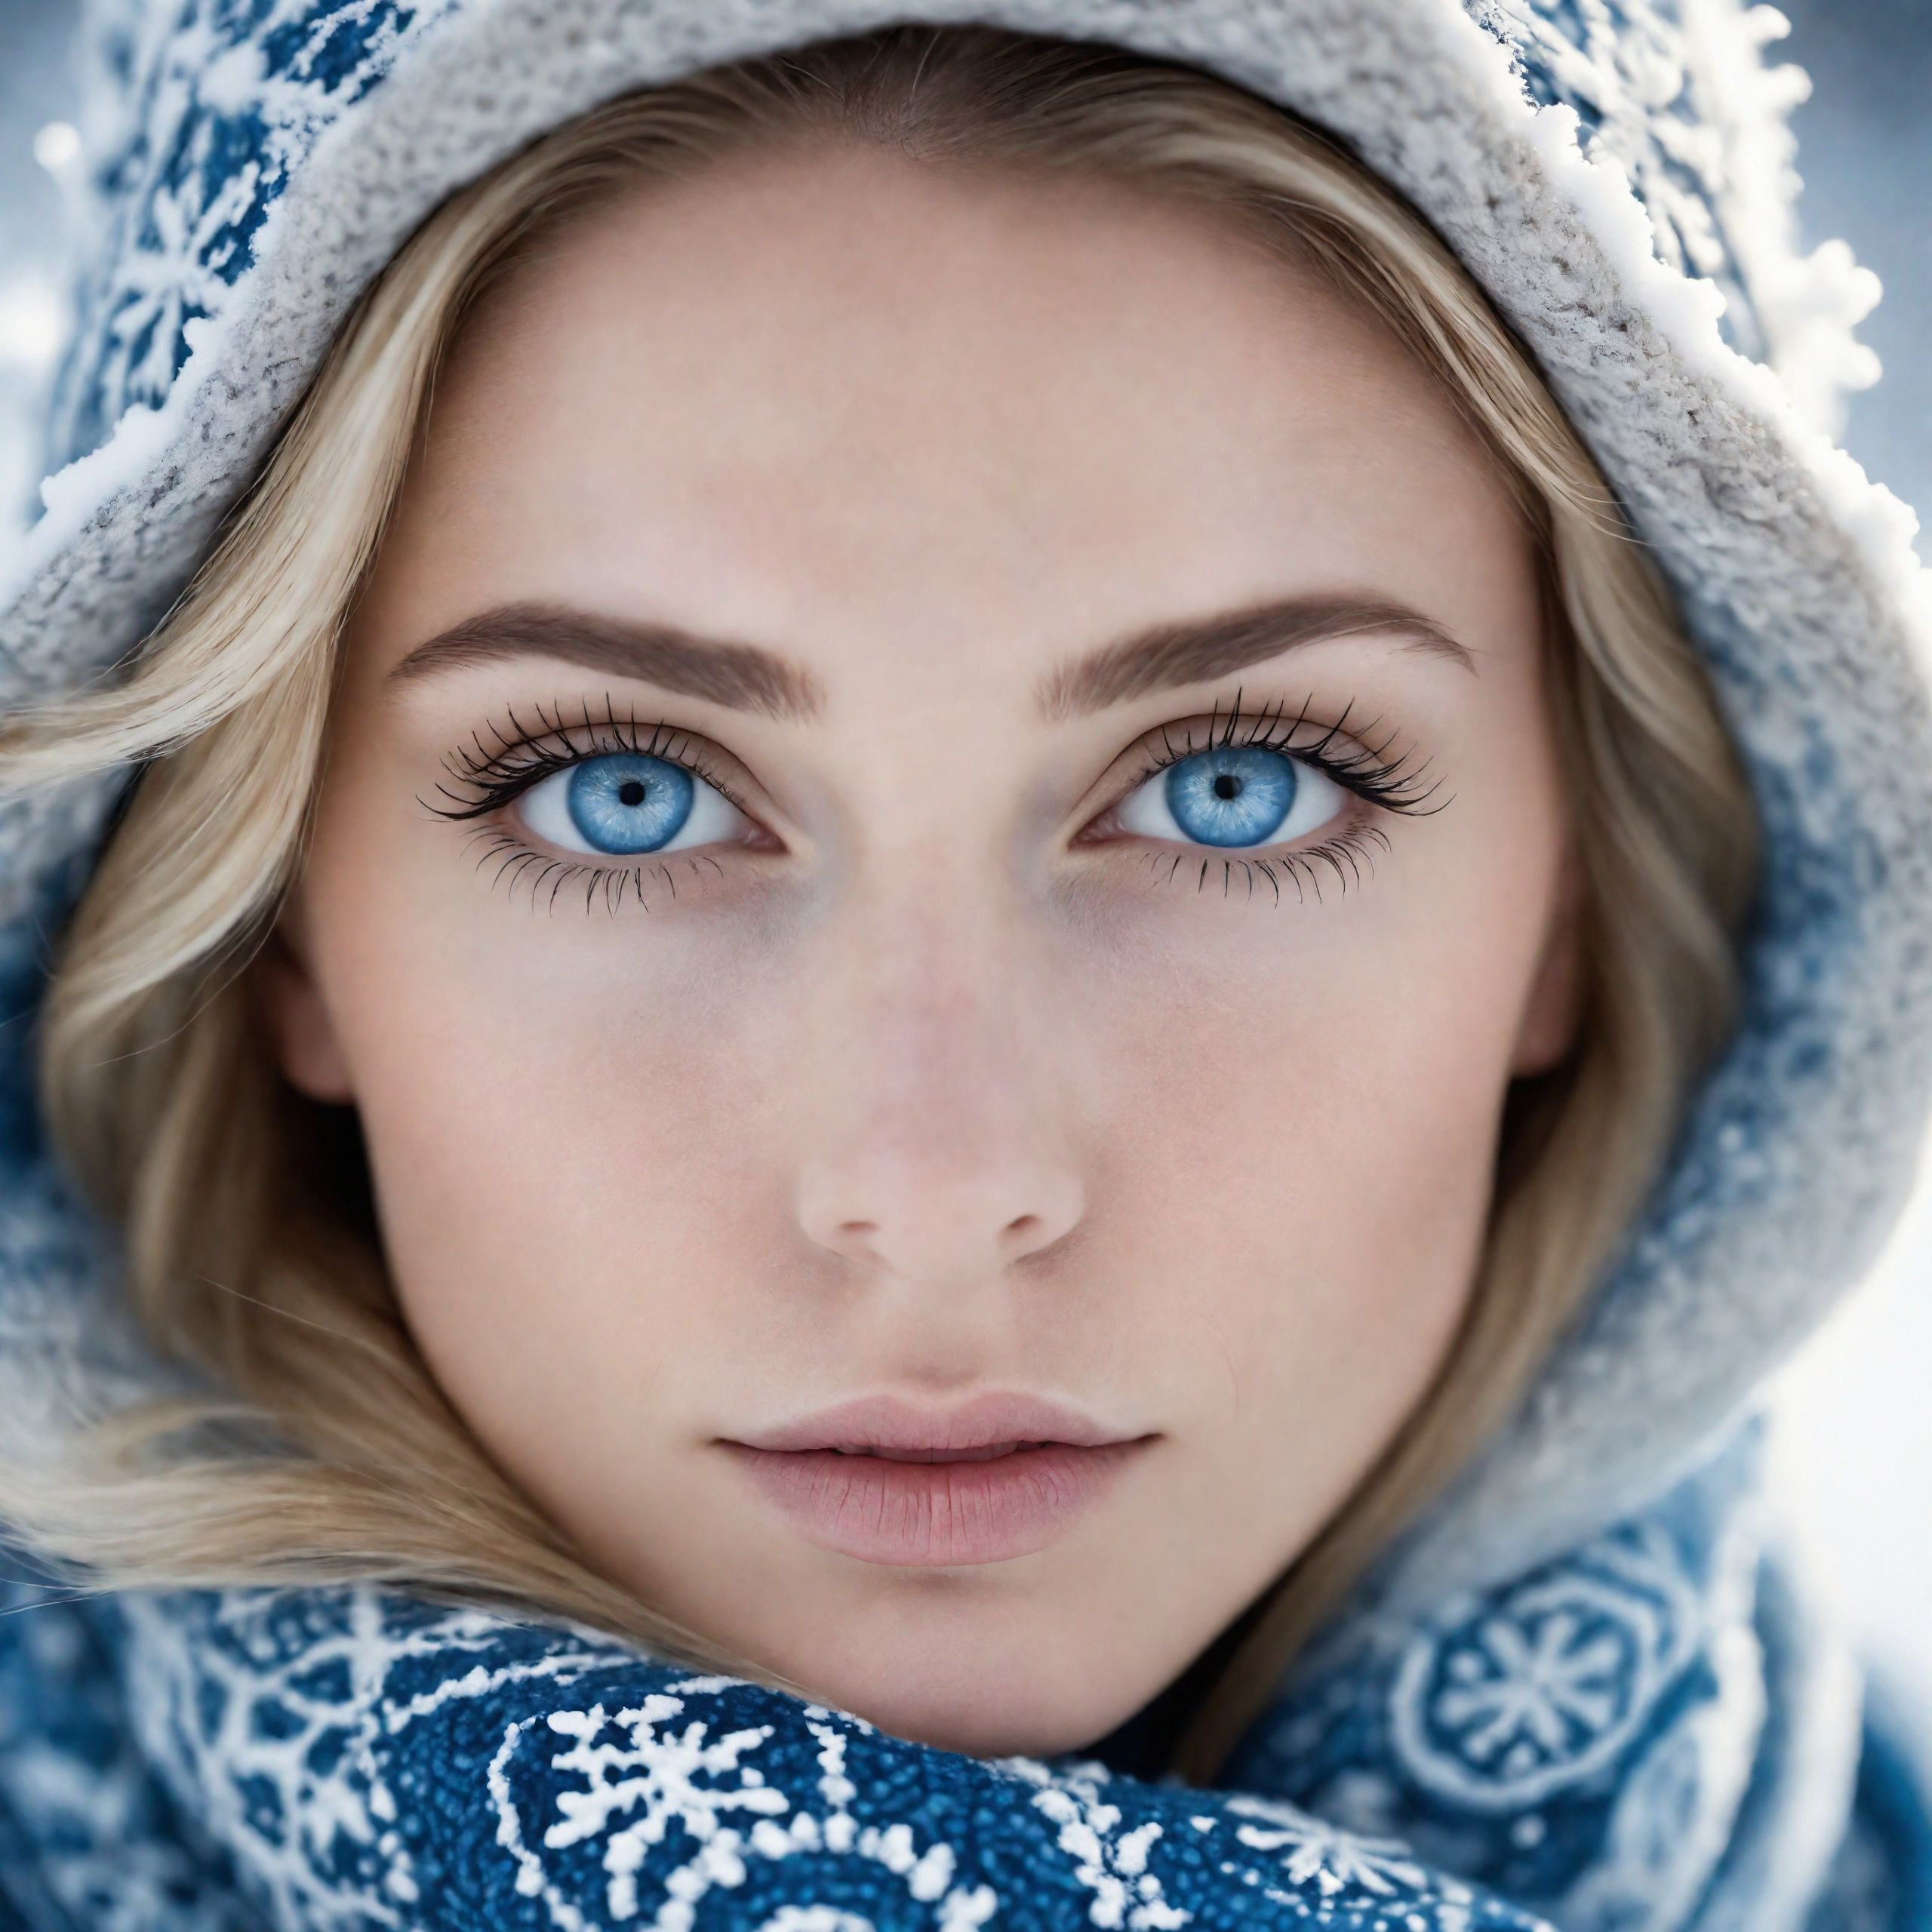 A Blonde Woman with Blue Eyes and a Light Blue Scarf.